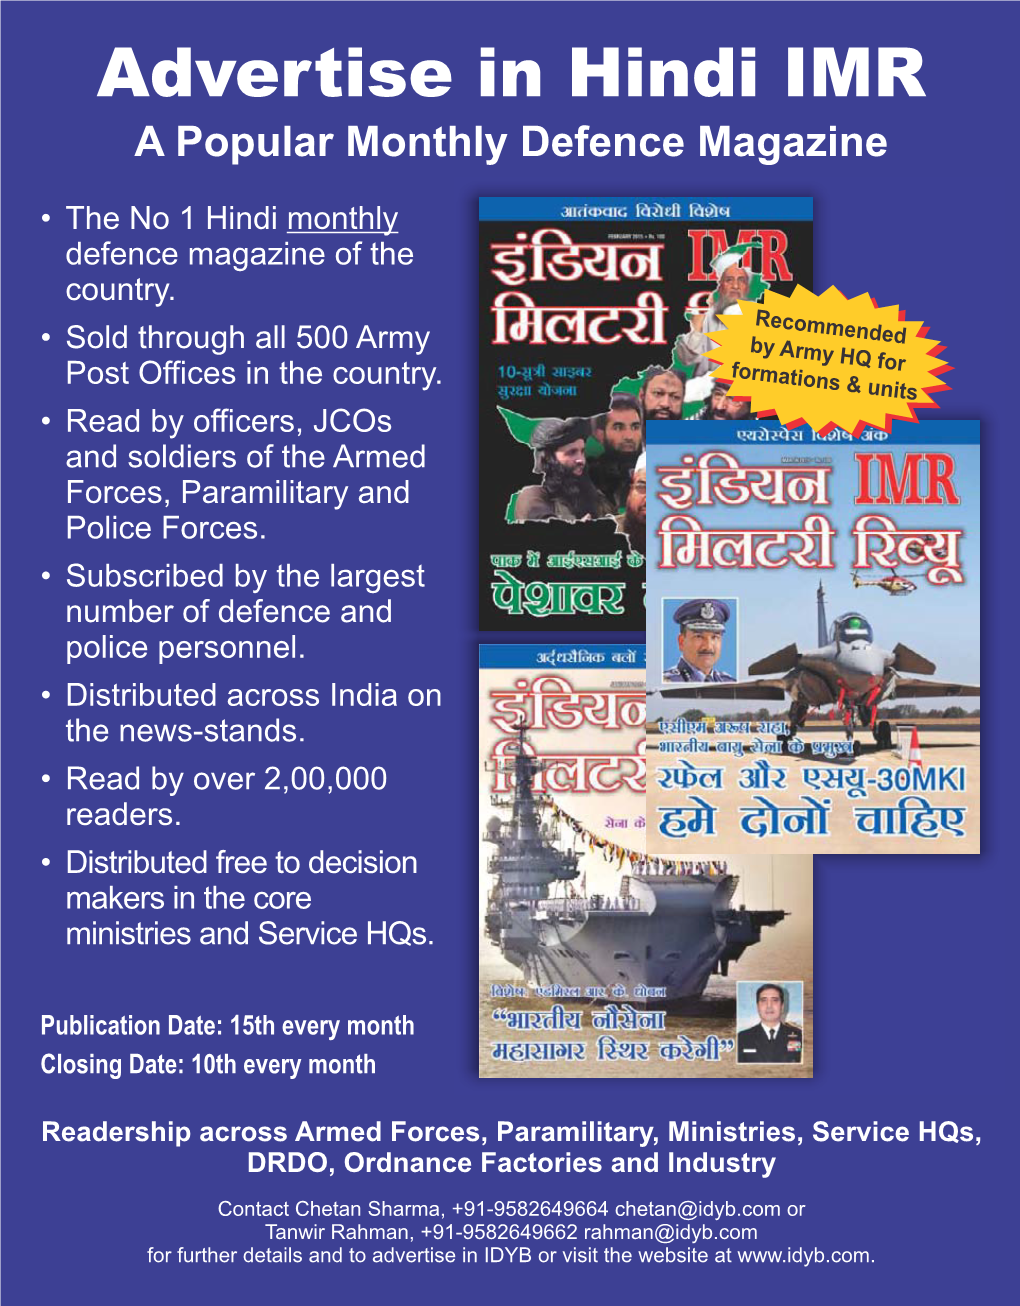 Advertise in Hindi IMR a Popular Monthly Defence Magazine